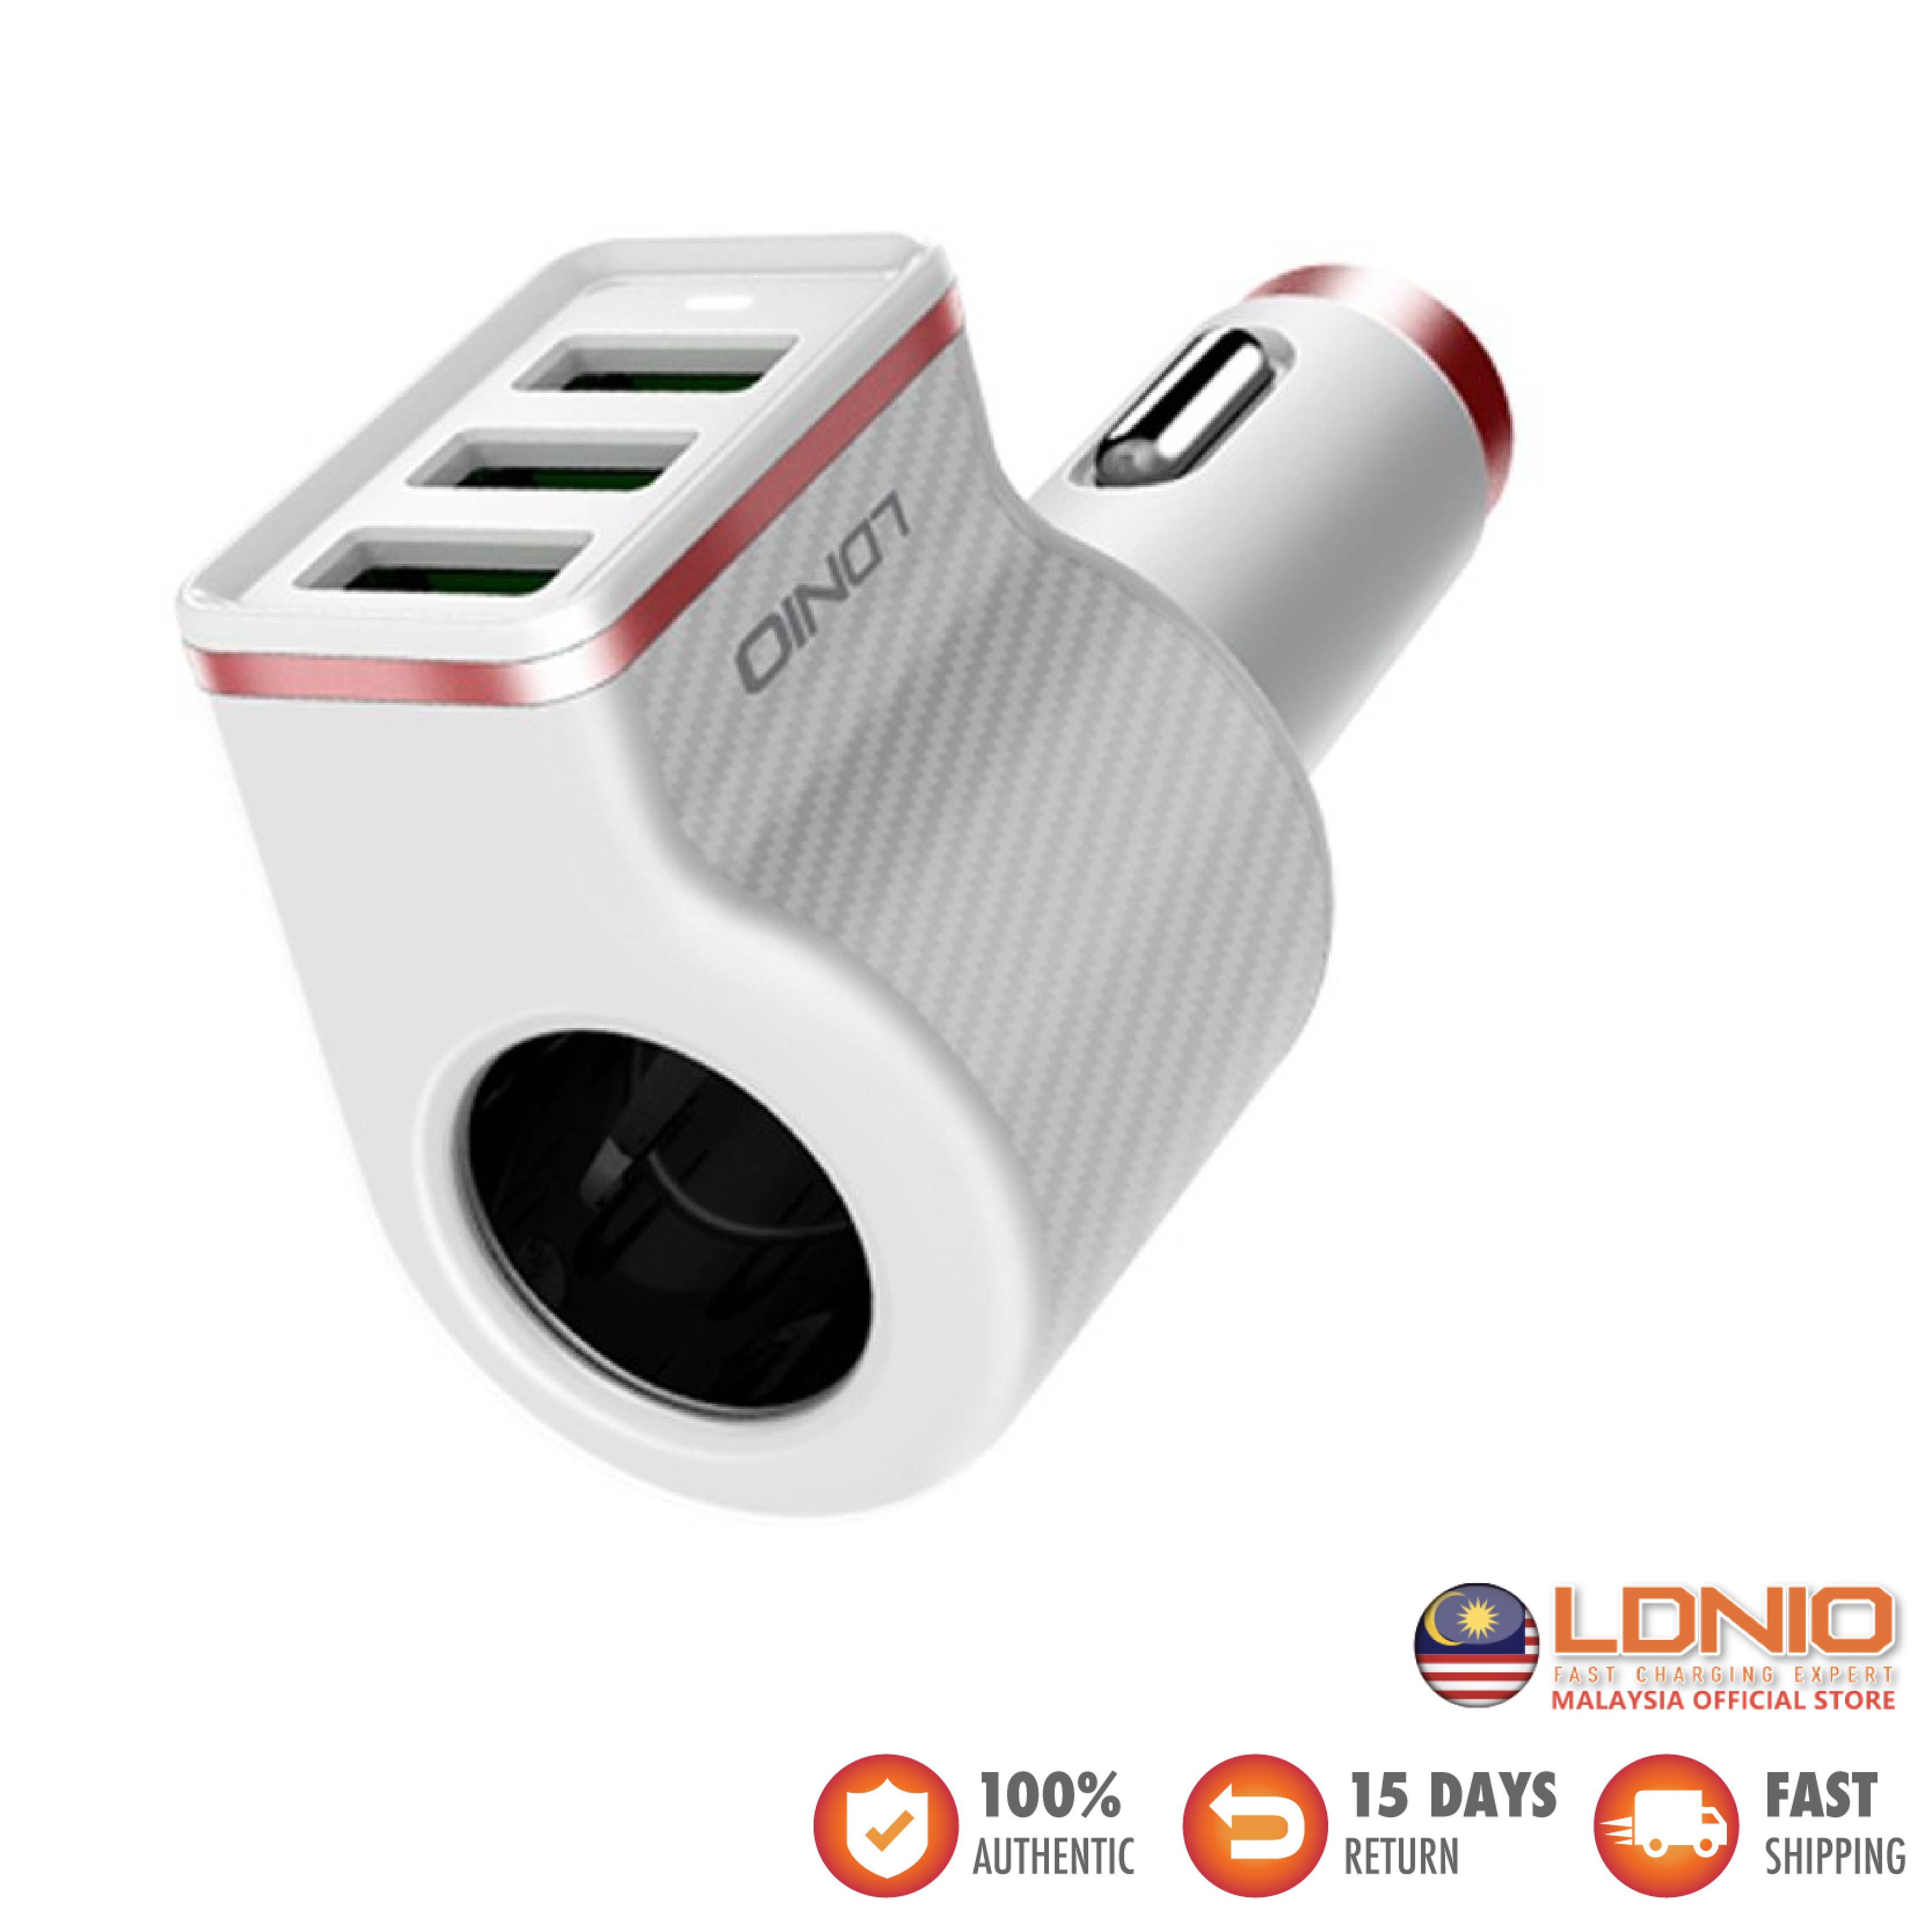 LDNIO CM12 3 USB Auto ID USB Fast Charging Car Charger with Charging Outlet (4.2A)